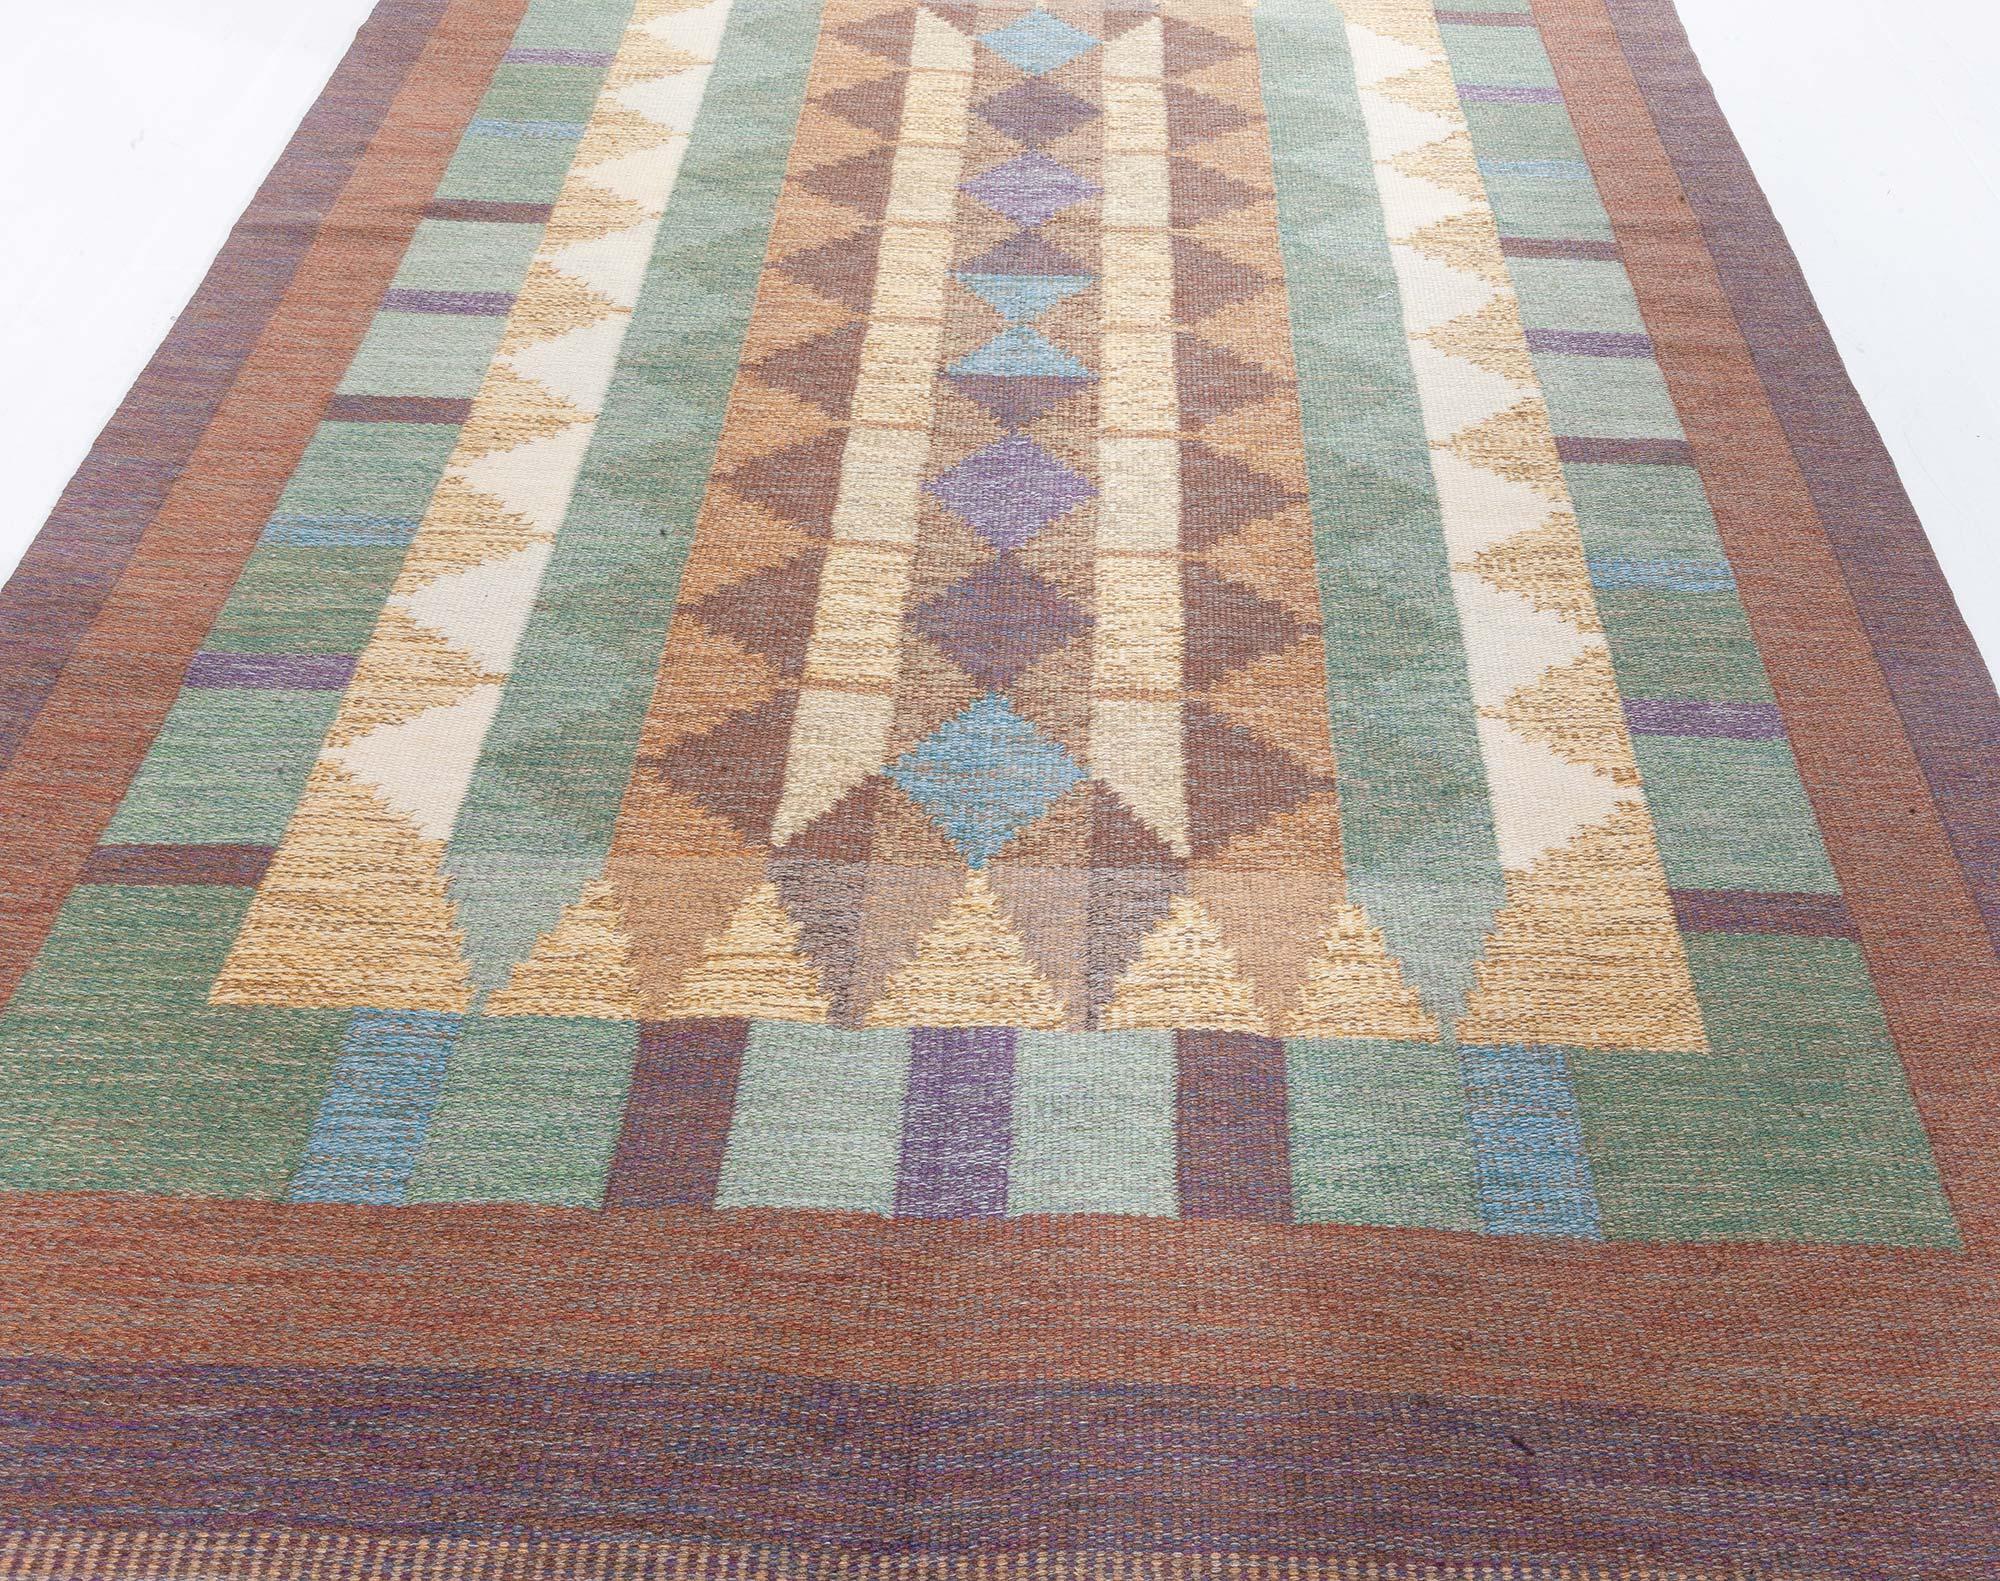 Vintage Swedish flat weave rug signed with Initials (IV)
Size: 6'4